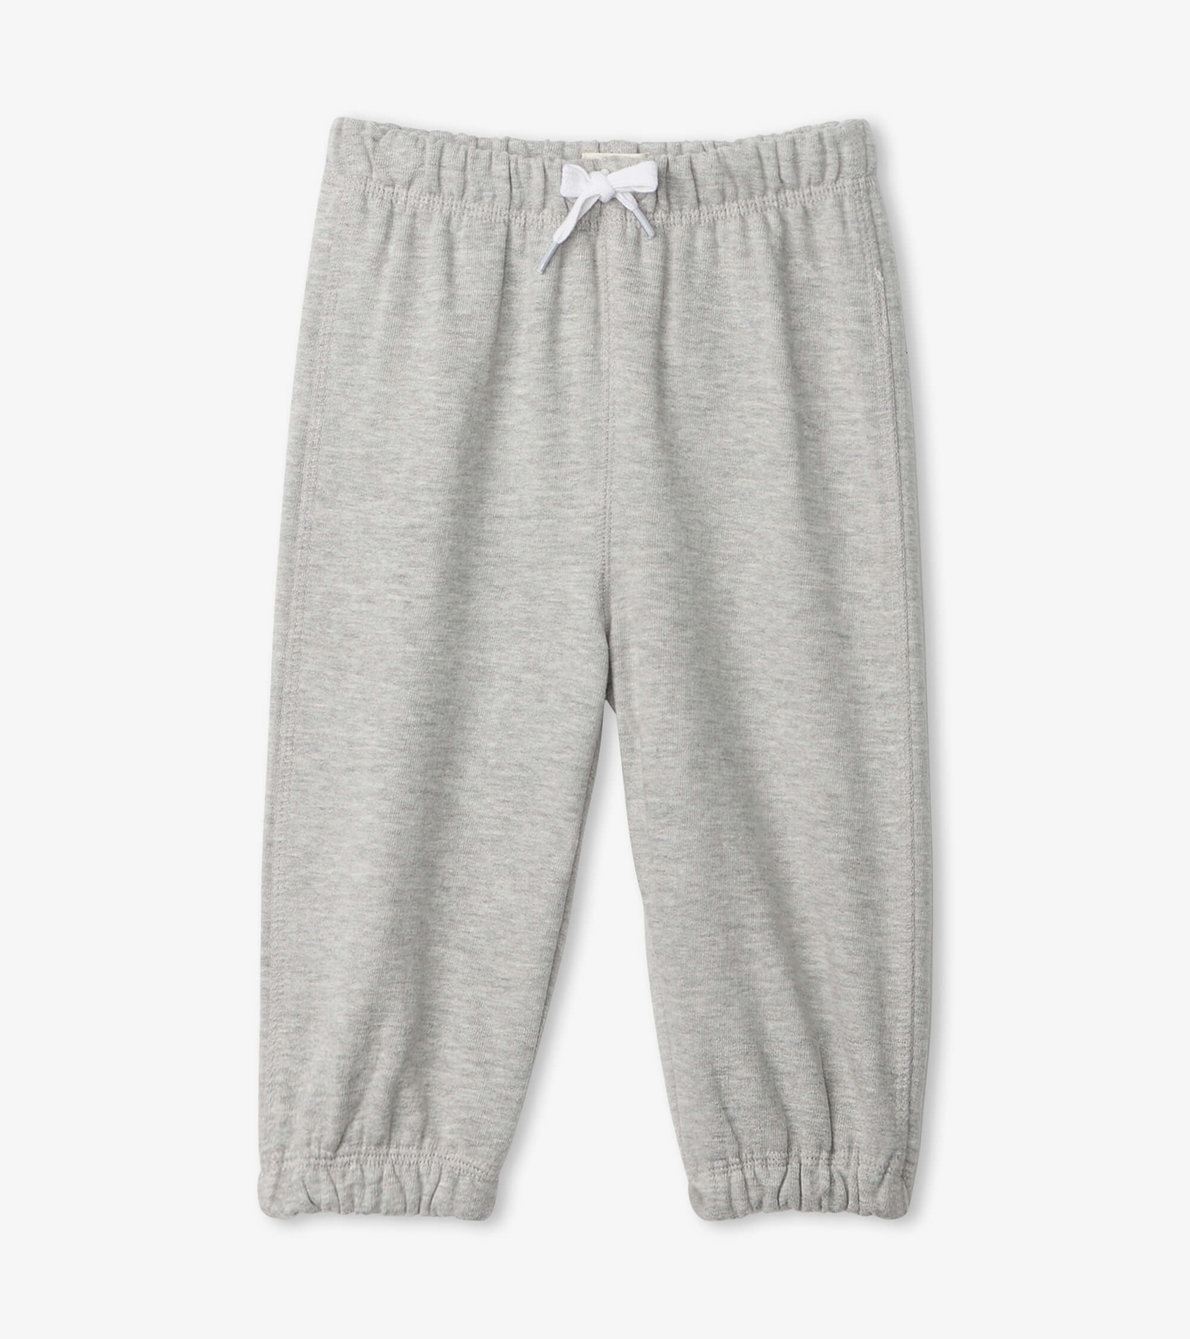 View larger image of Grey French Terry Baby Joggers